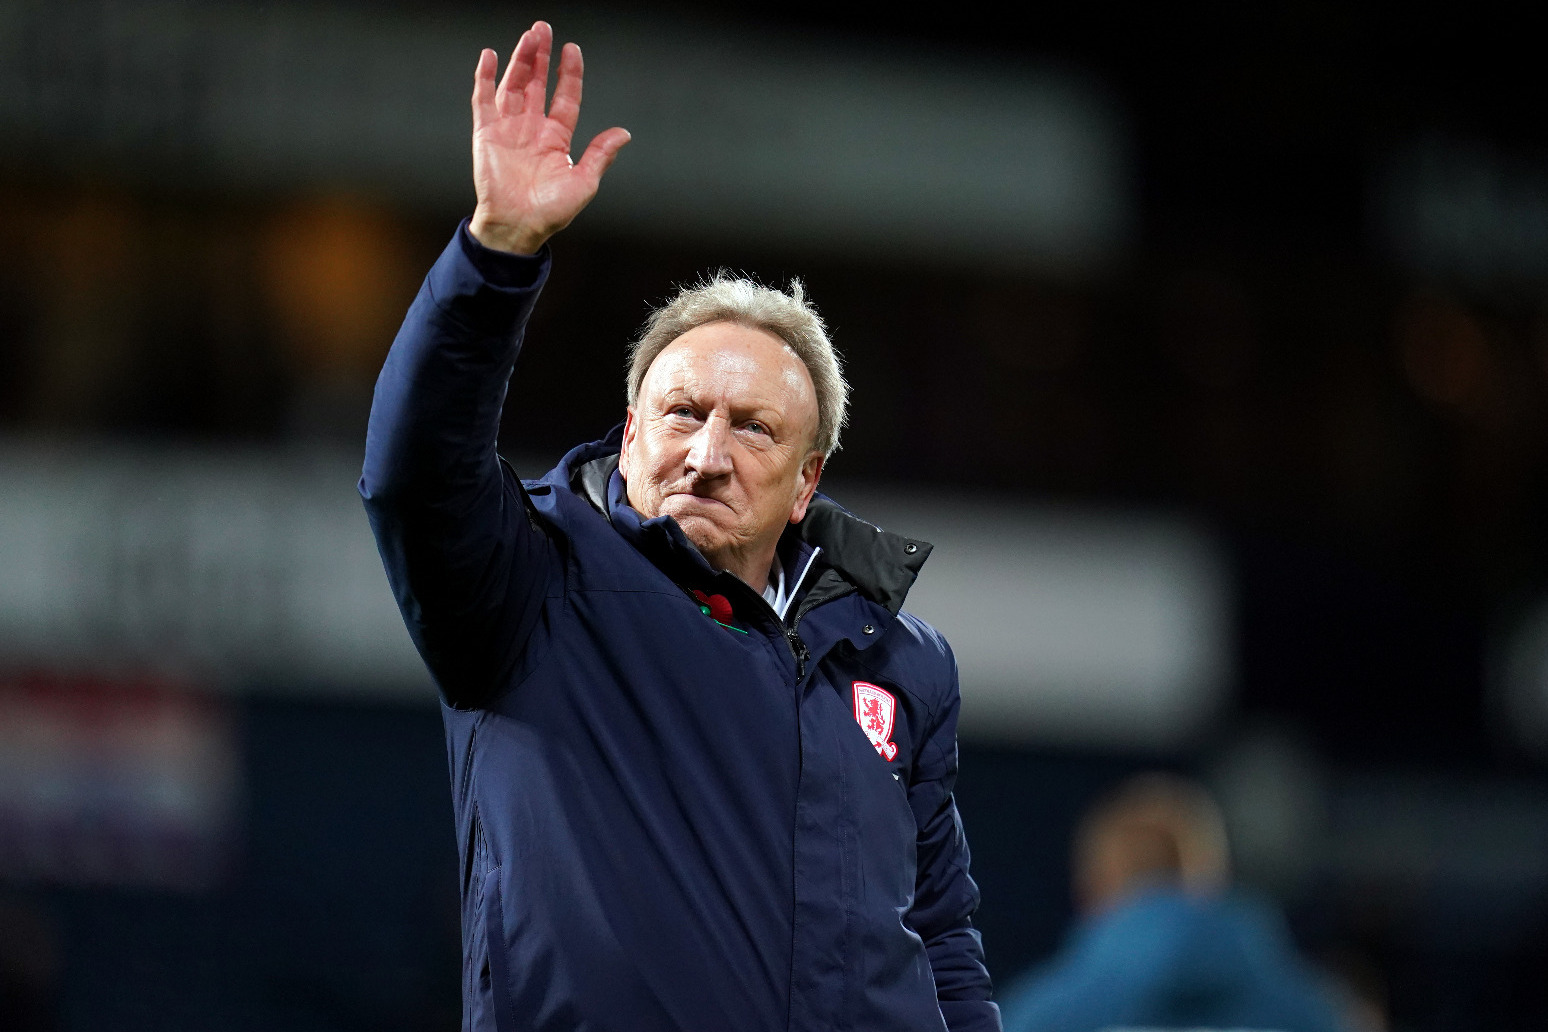 Neil Warnock comes out of retirement to take charge at Huddersfield 